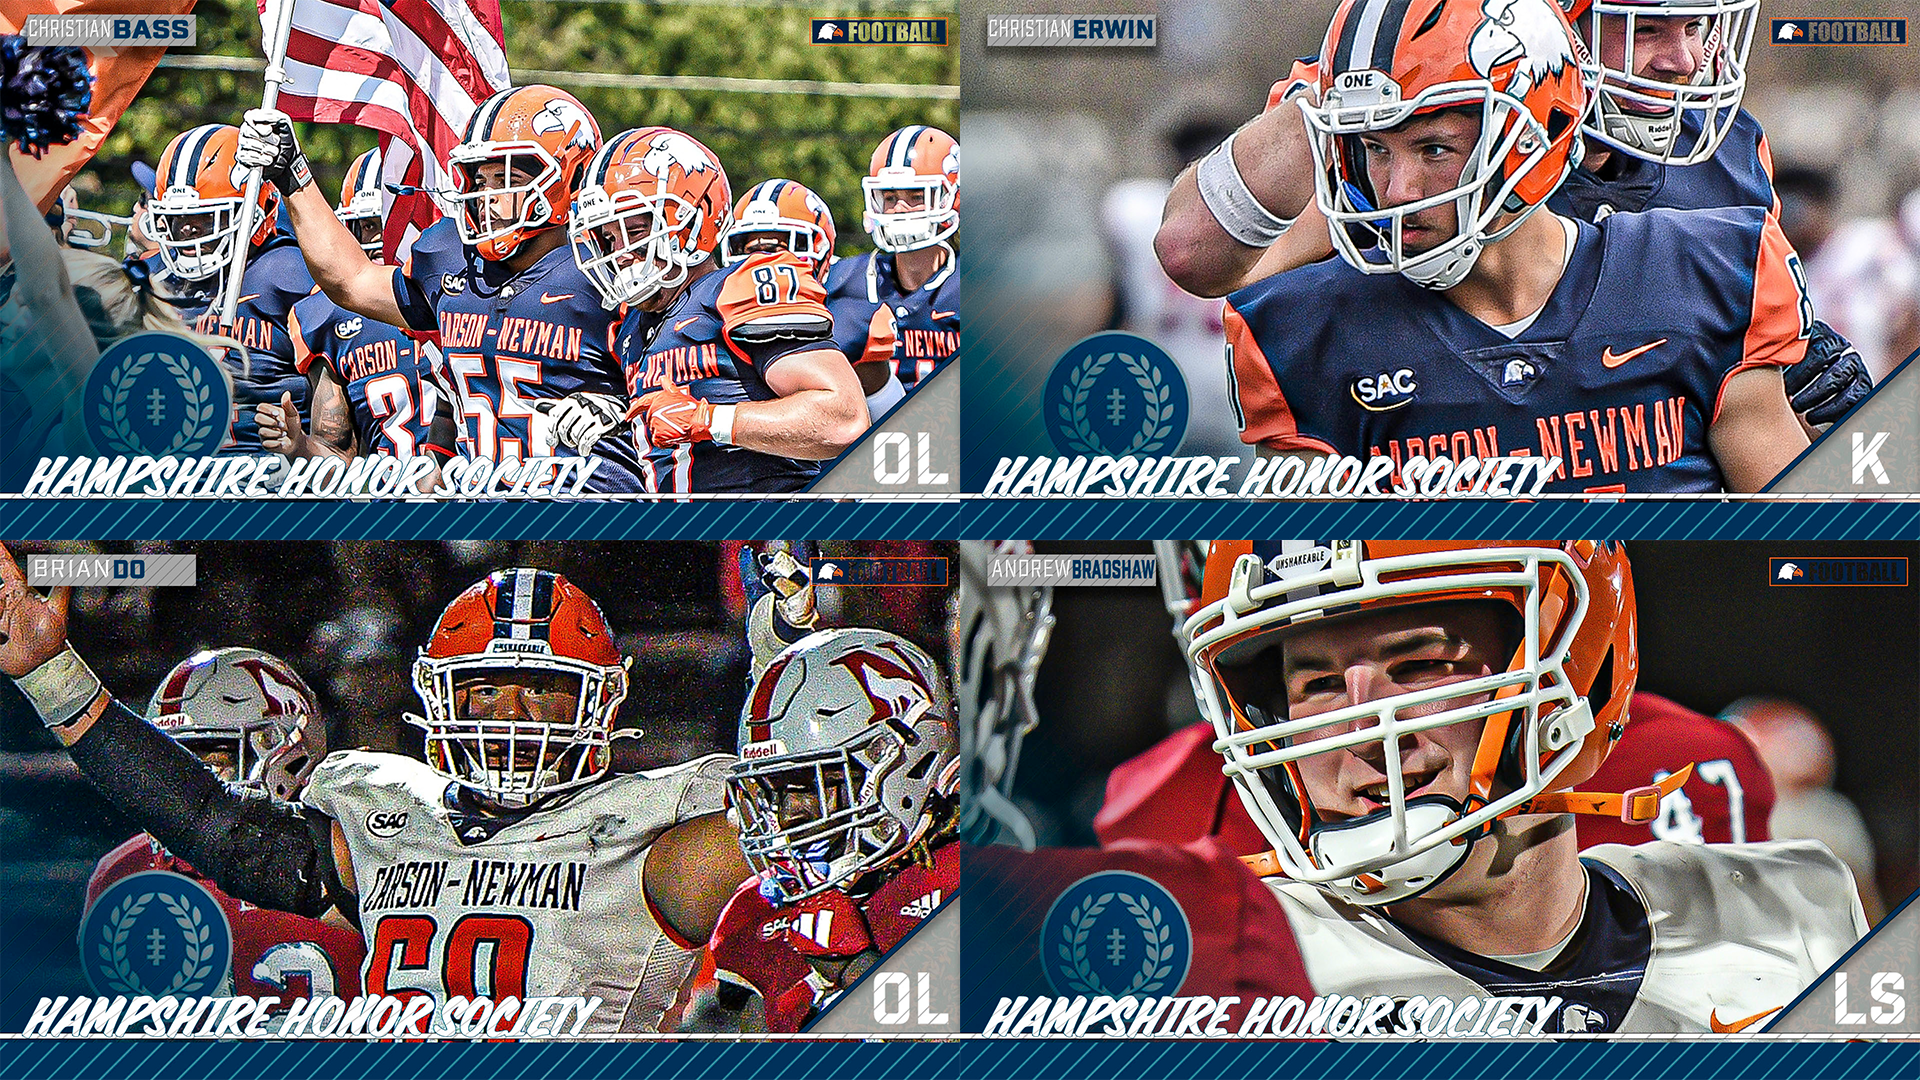 Quartet of Eagles recognized with spots in NFF Hampshire Honor Society